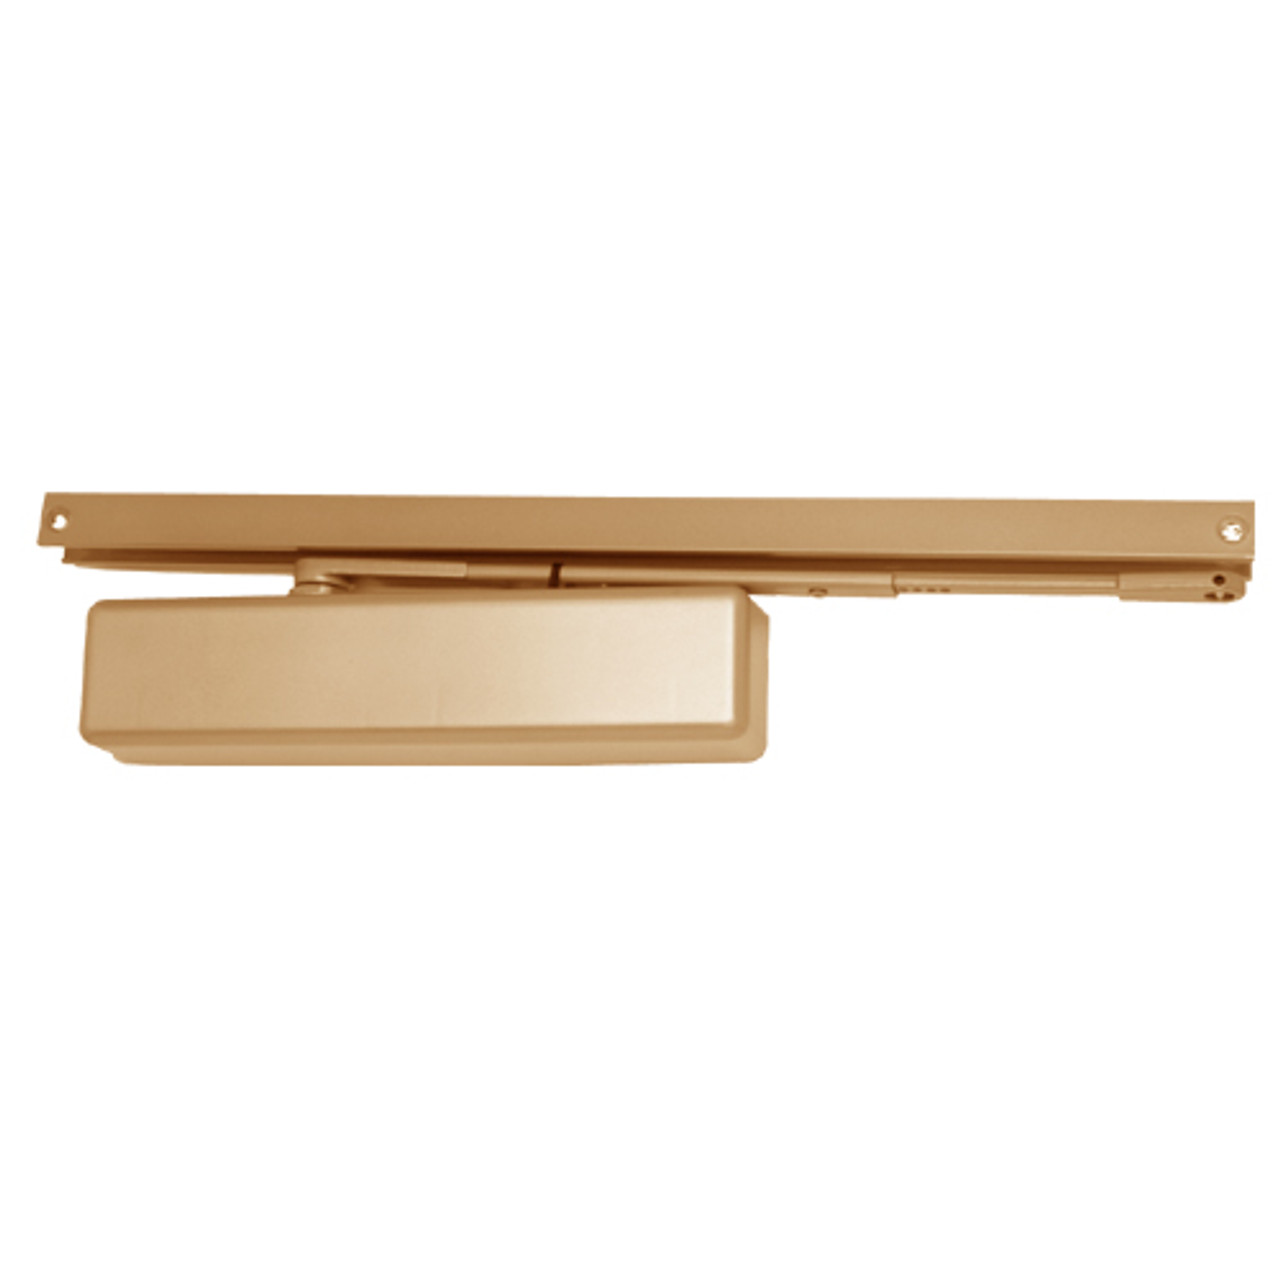 1460T-H-LTBRZ LCN Surface Mount Door Closer with Hold Open Arm in Light Bronze Finish